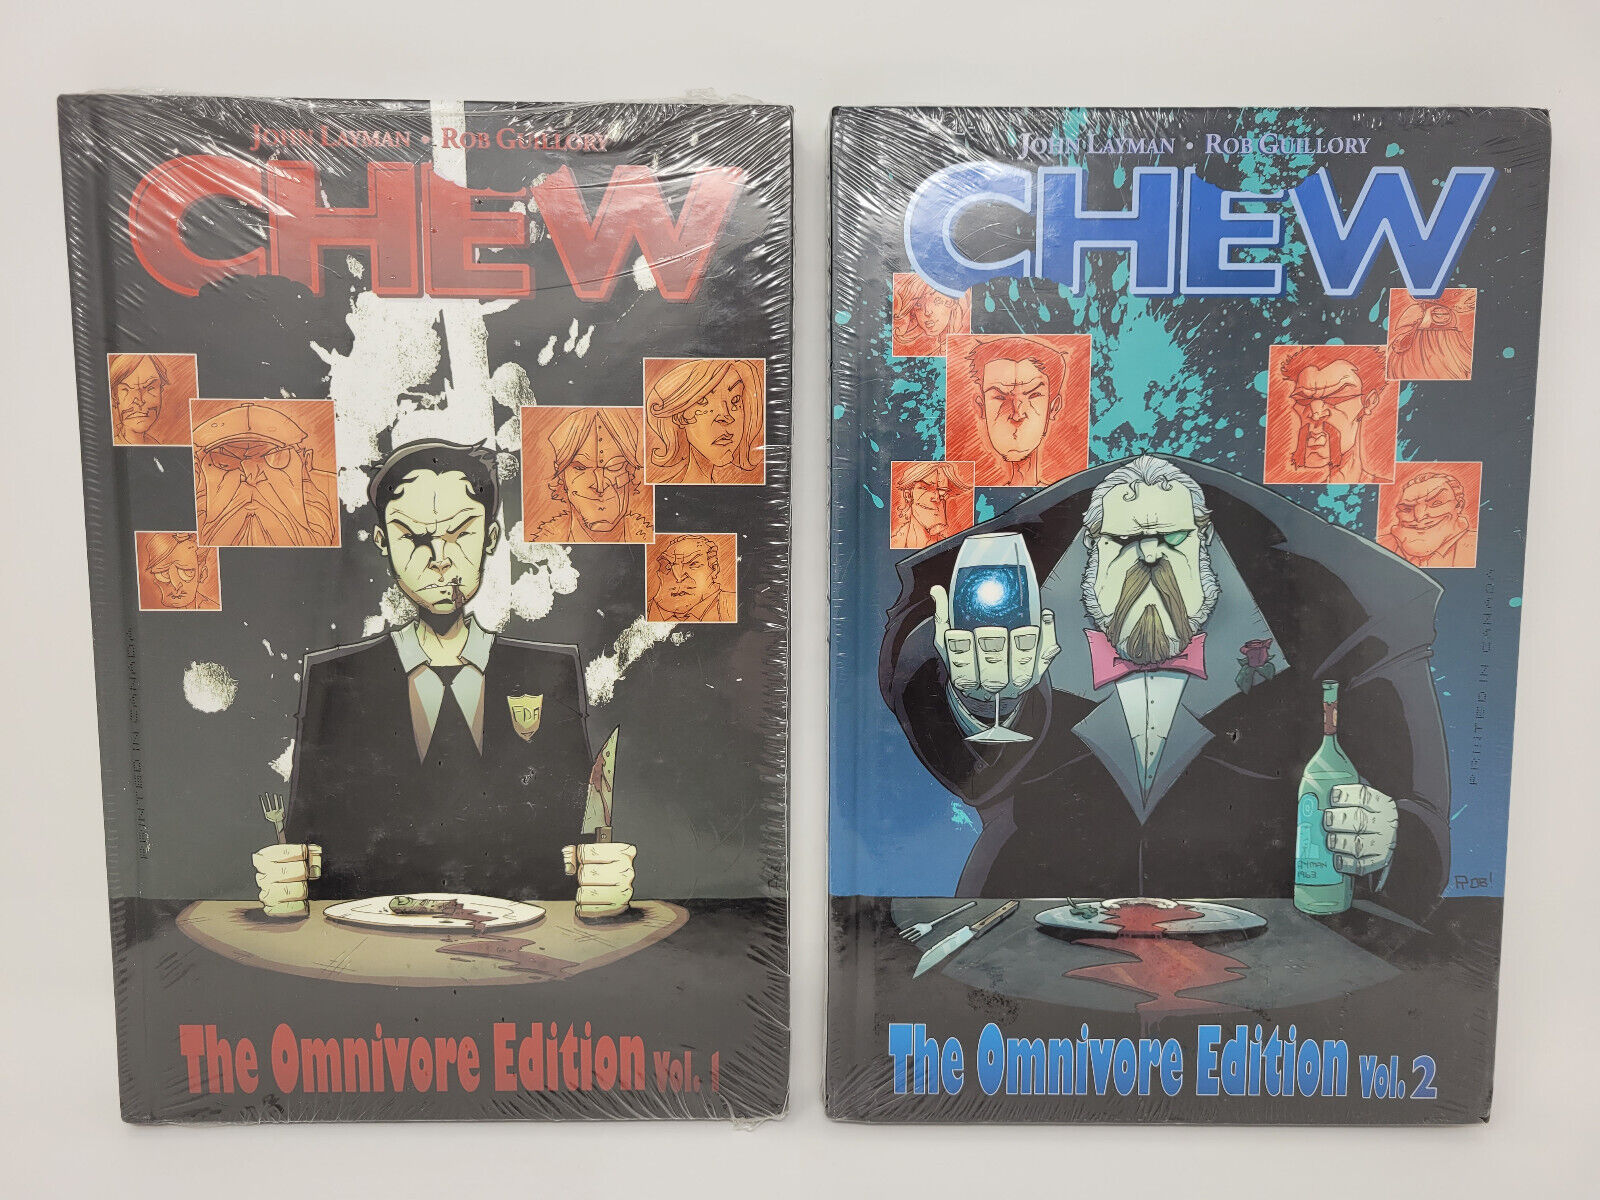 Chew: The Omnivore Edition, Vol. 1 & 2 Hardcover by Layman & Guillory - NEW